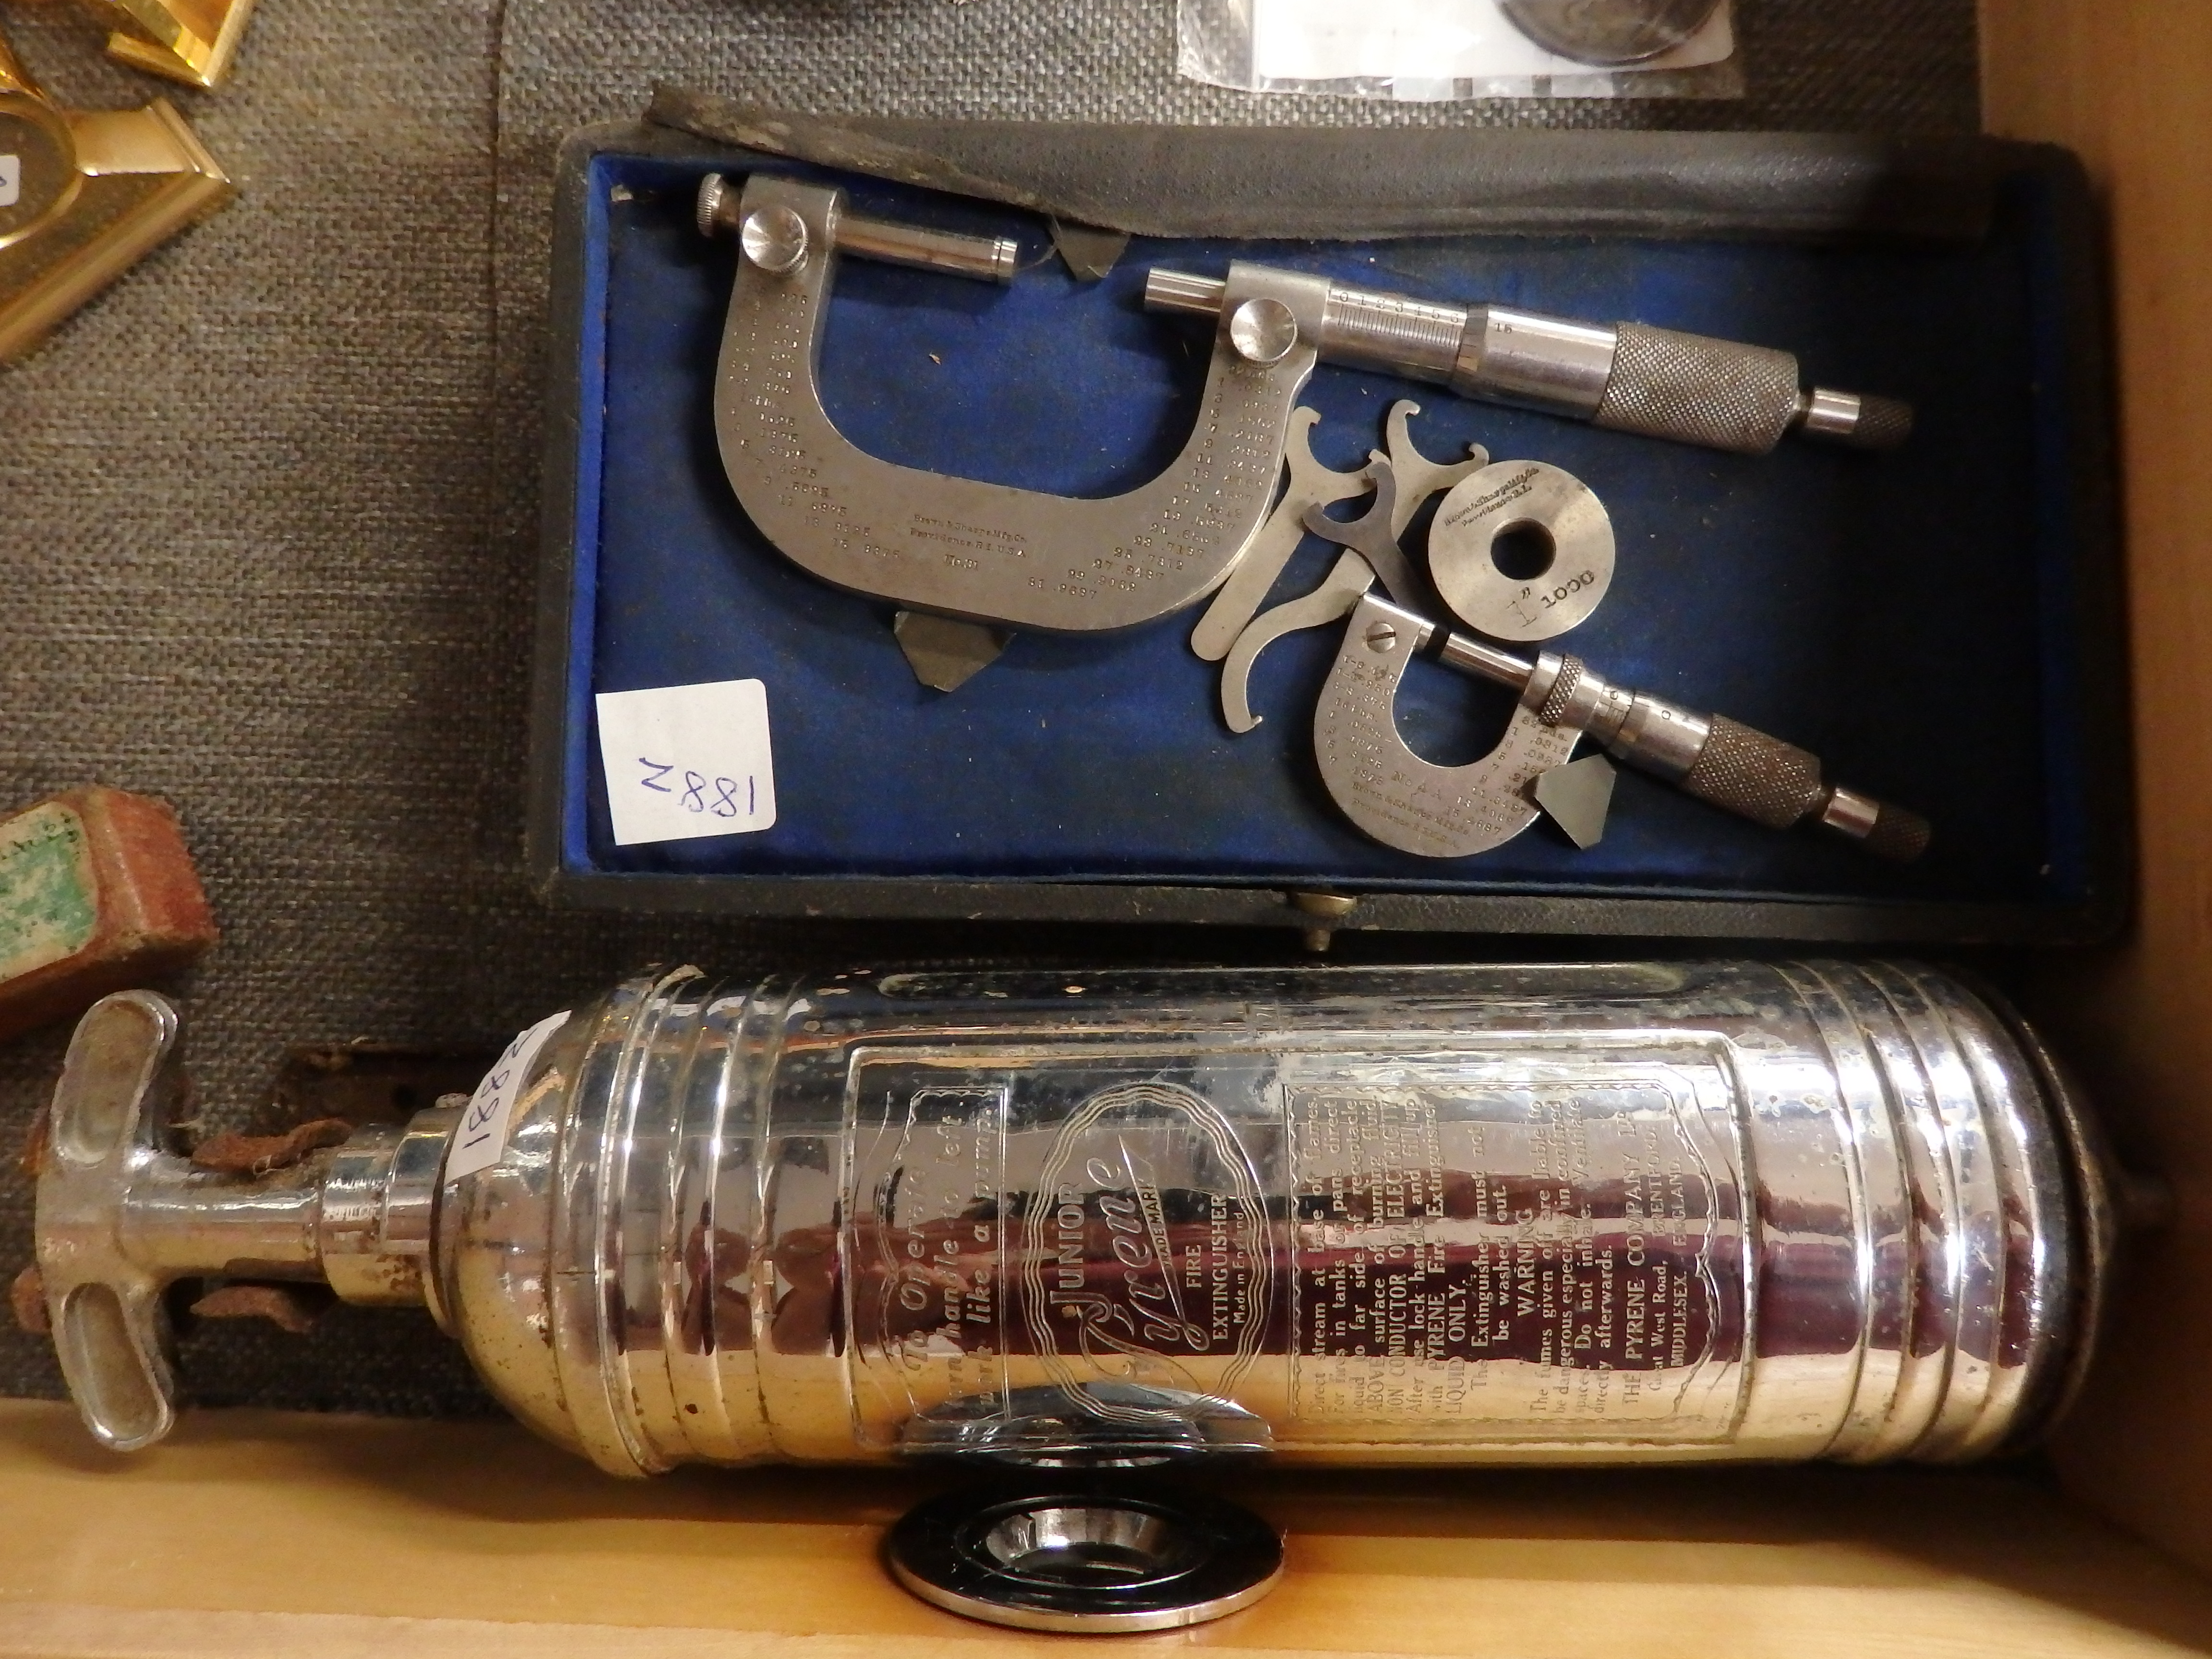 American micrometer and car fire extguisher